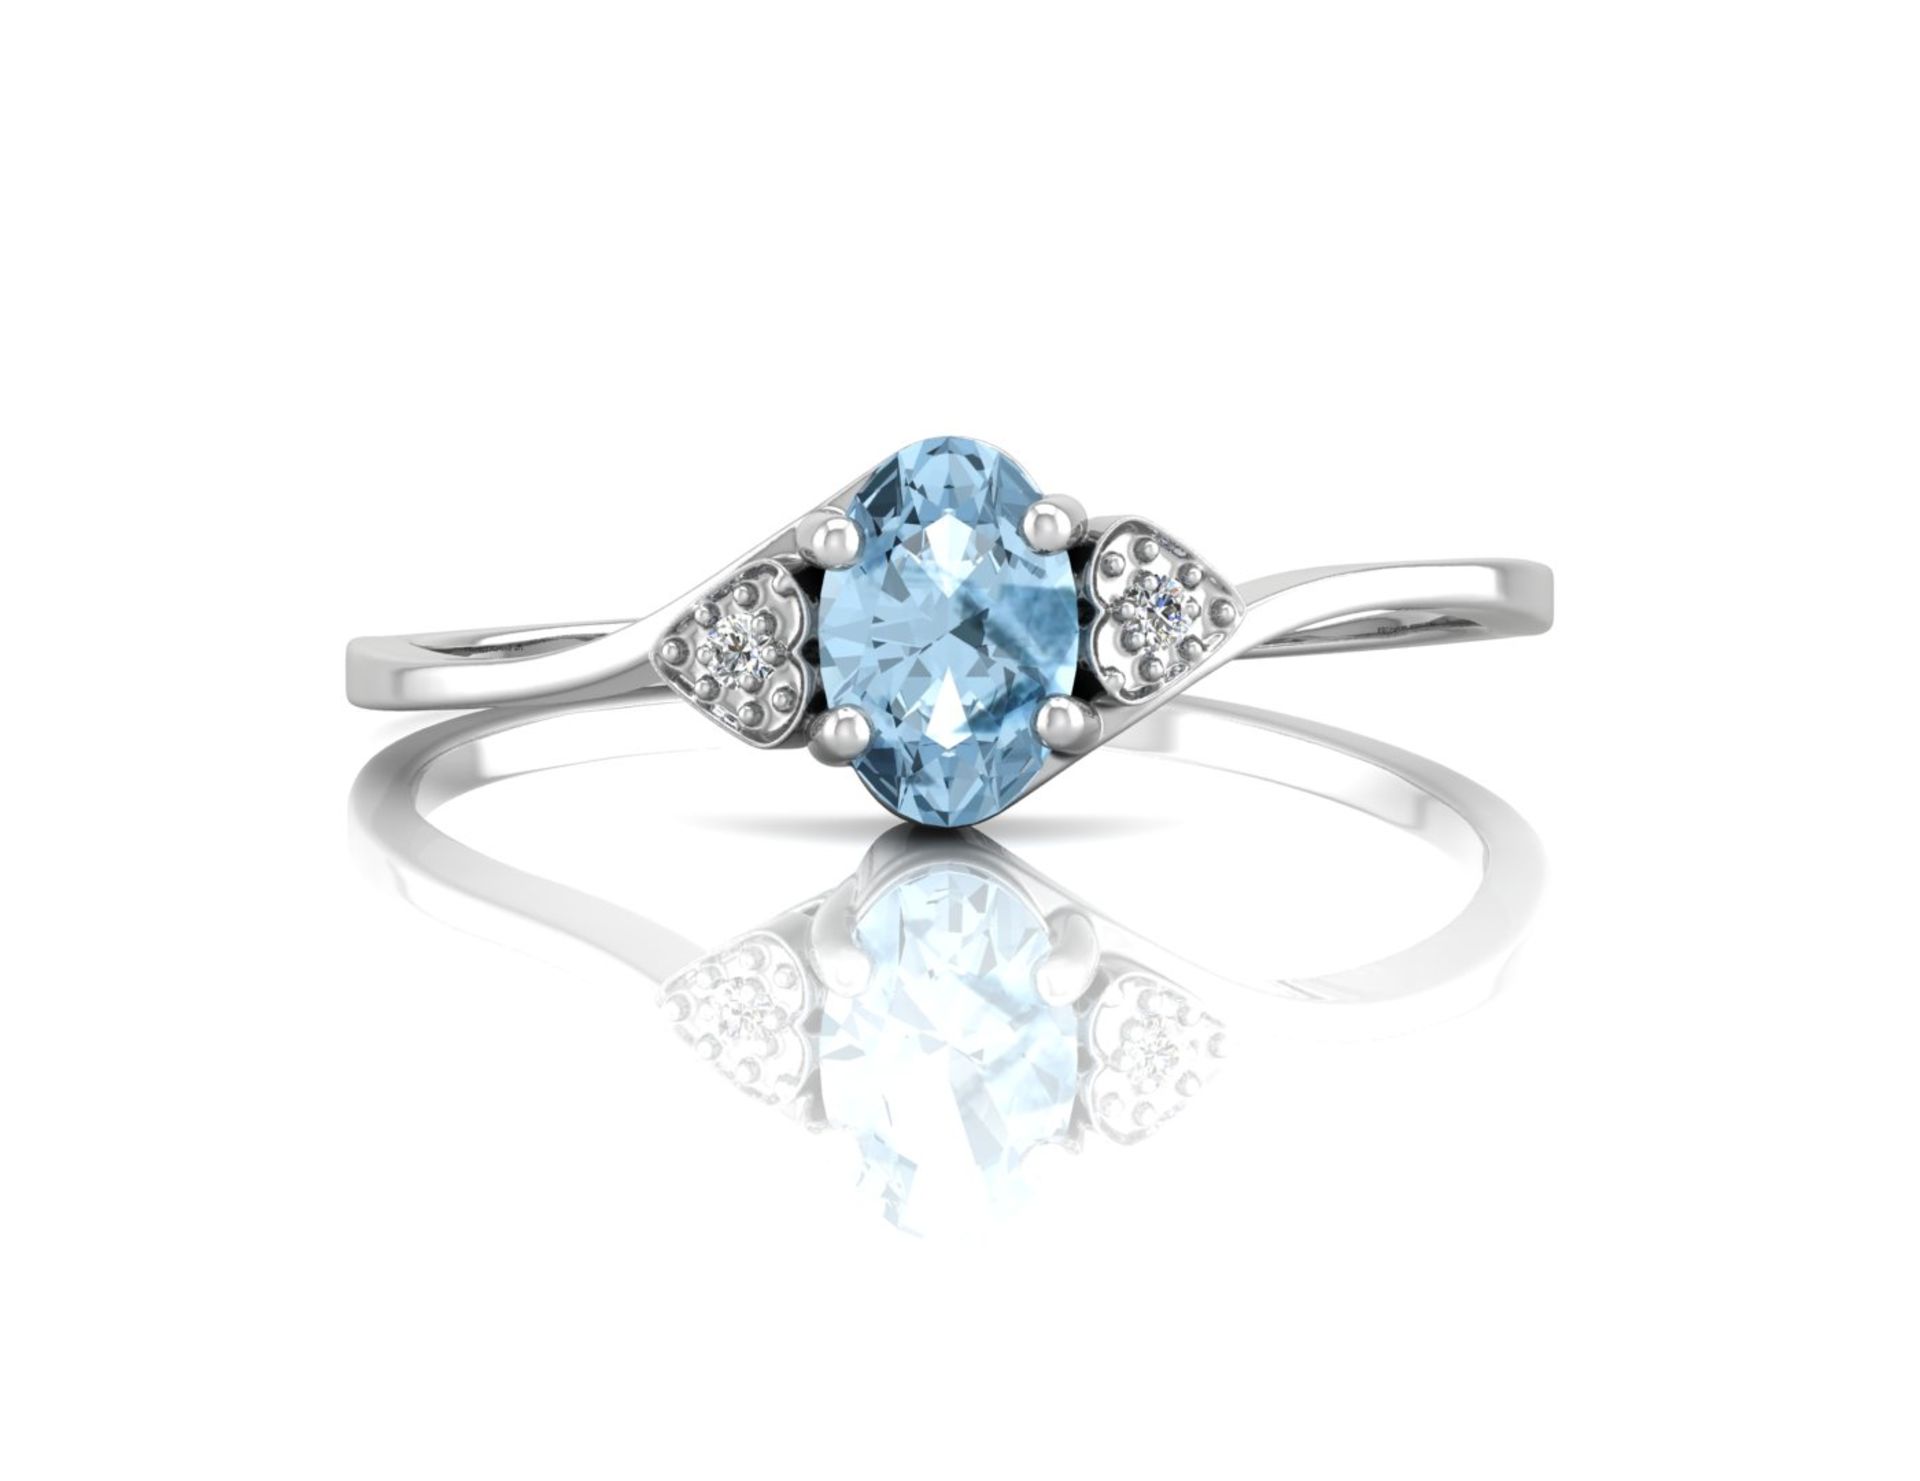 9ct White Gold Fancy Cluster Diamond Blue Topaz Ring 0.01 Carats - Valued by GIE £860.00 - 9ct White - Image 4 of 6